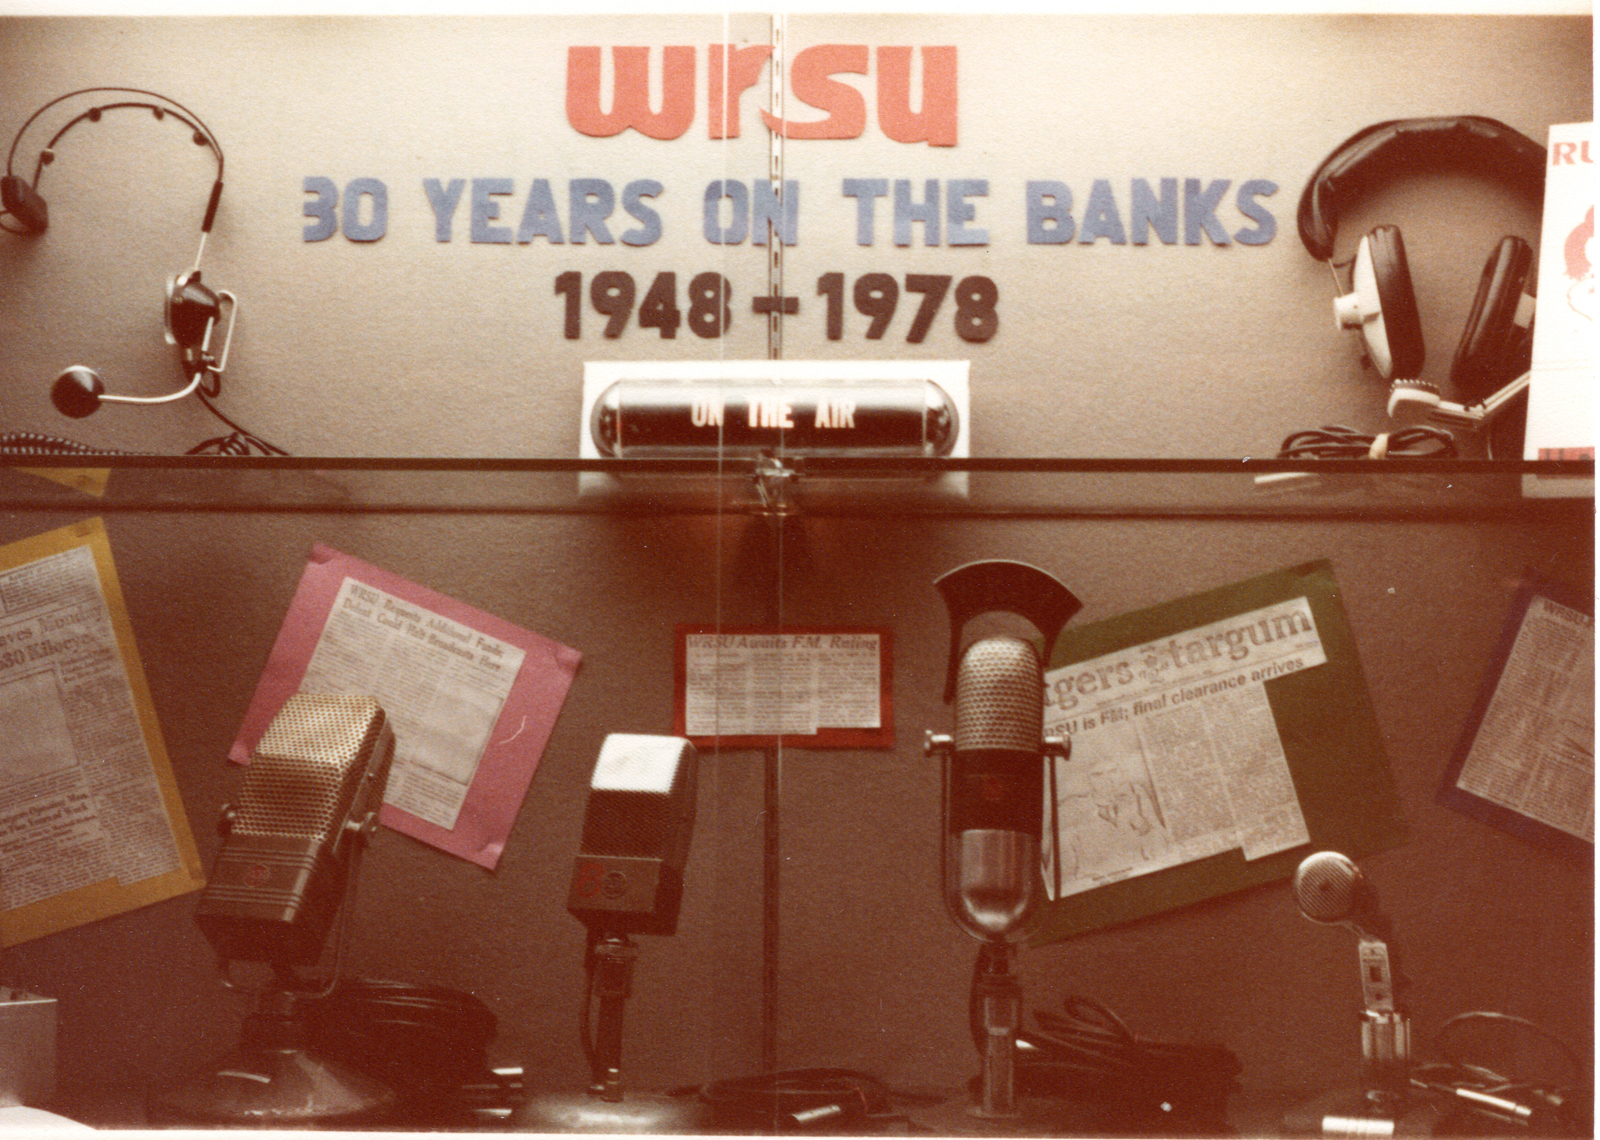 1978 Display in 3rd Floor Lounge in the Rutgers Student Center for WRSU 30th Anniversary